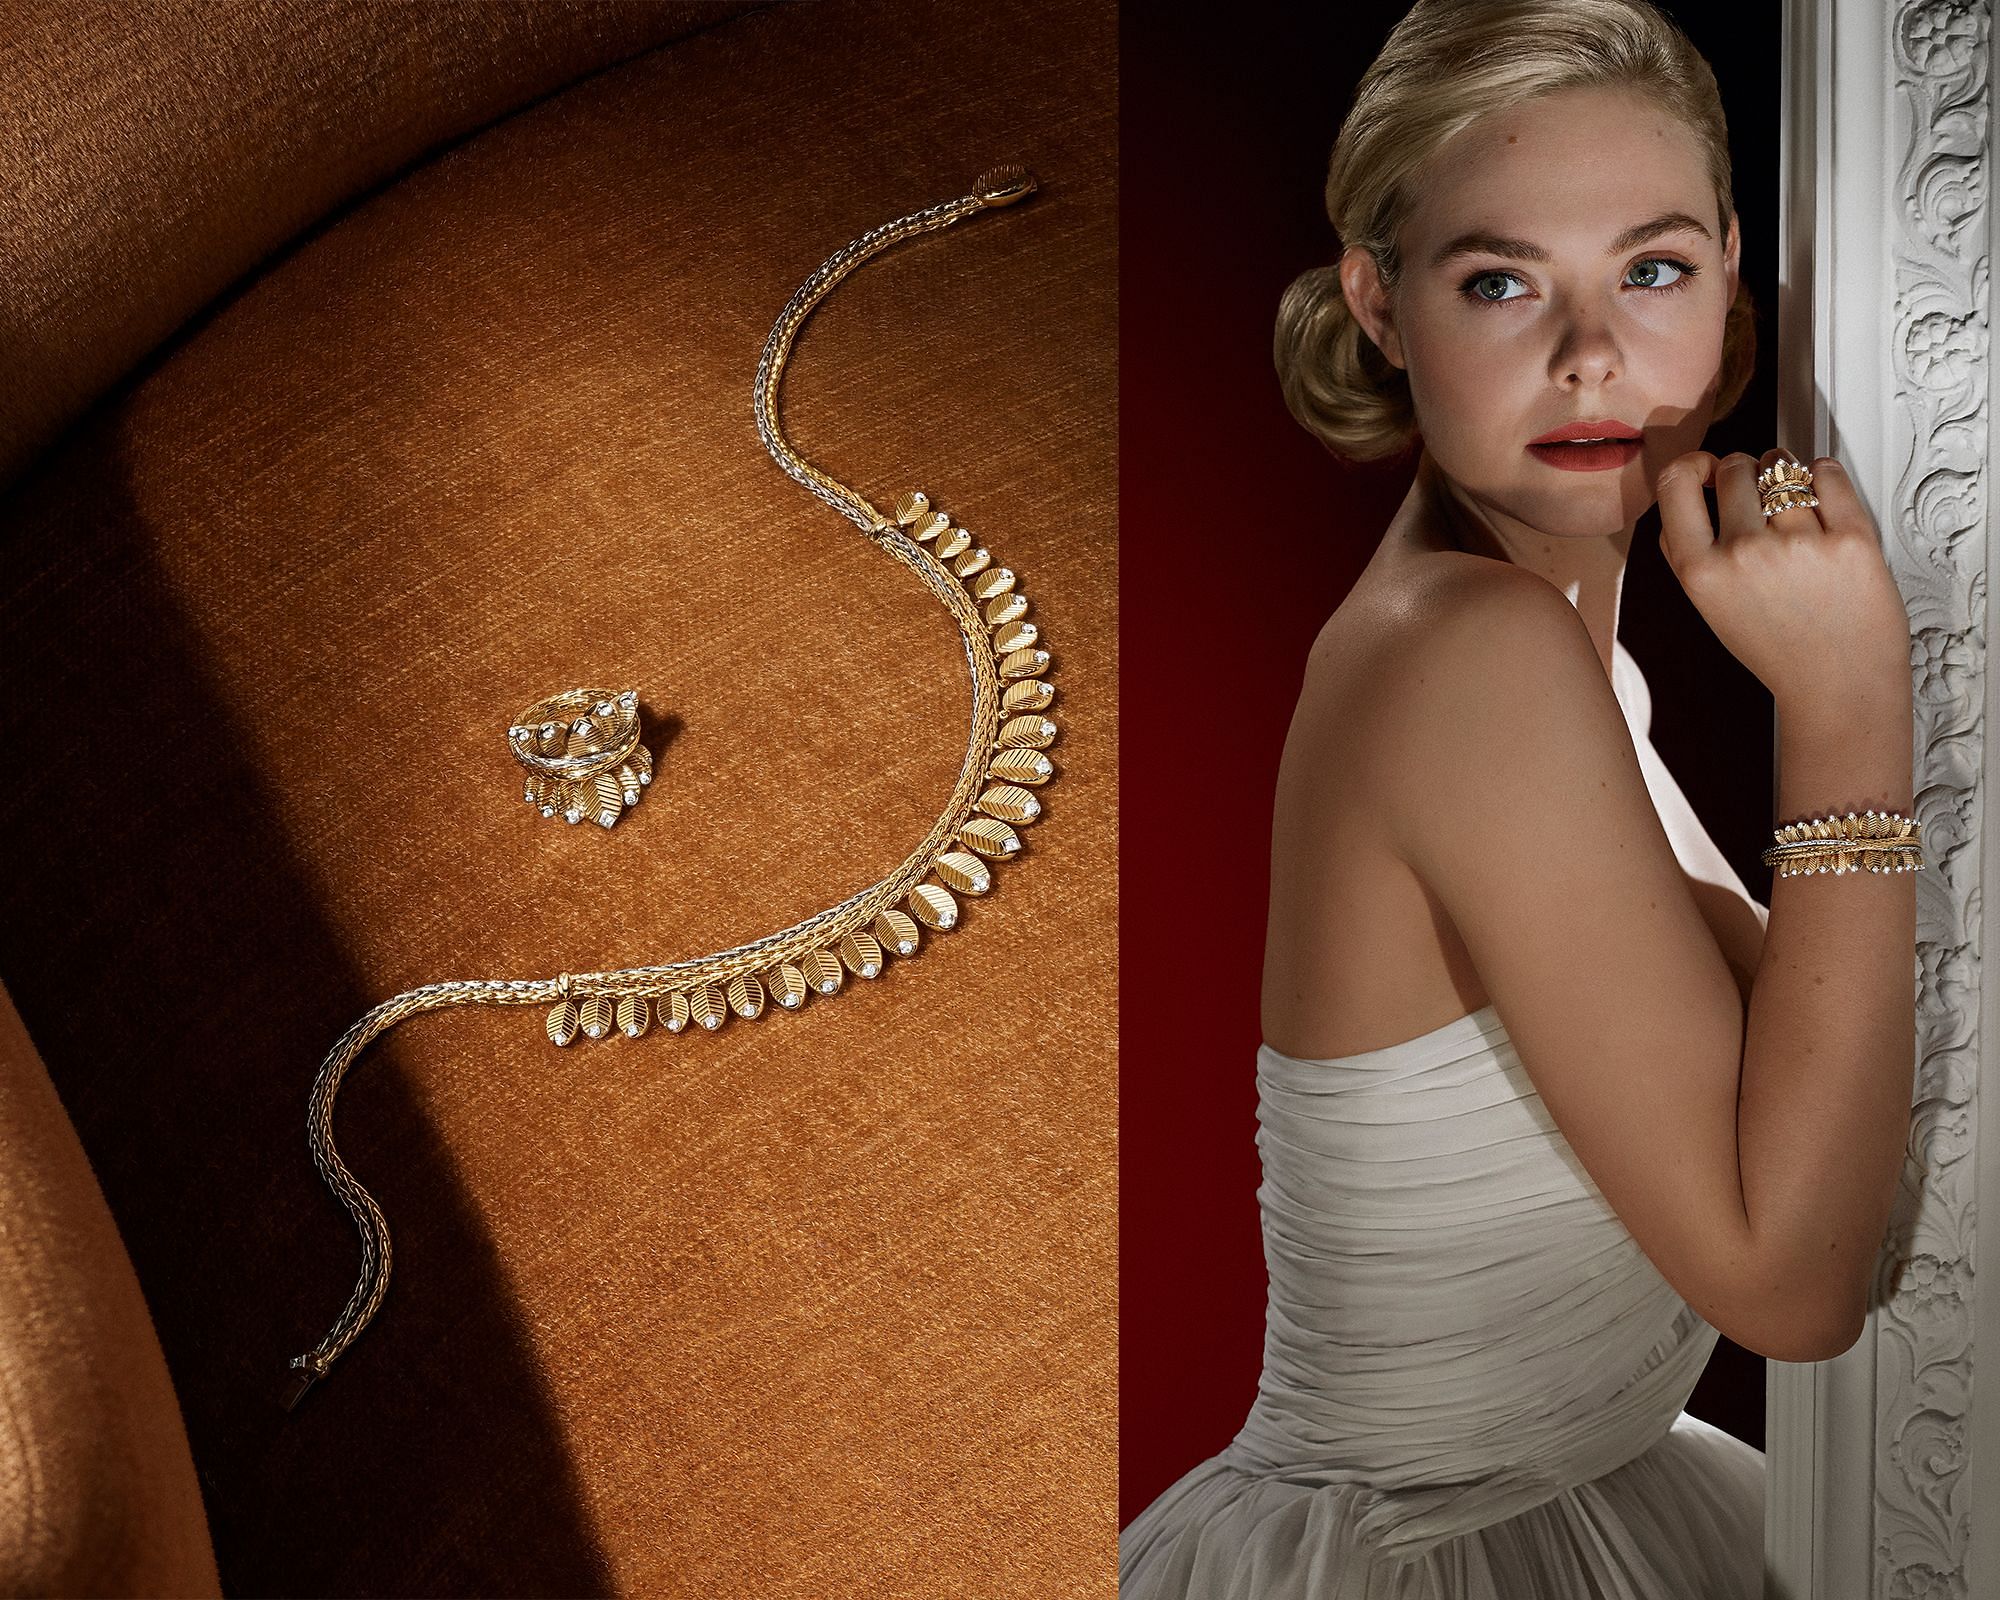 Cartier Grain de Cafe thumbnail featuring a necklace and Elle Fanning in the new campaign.